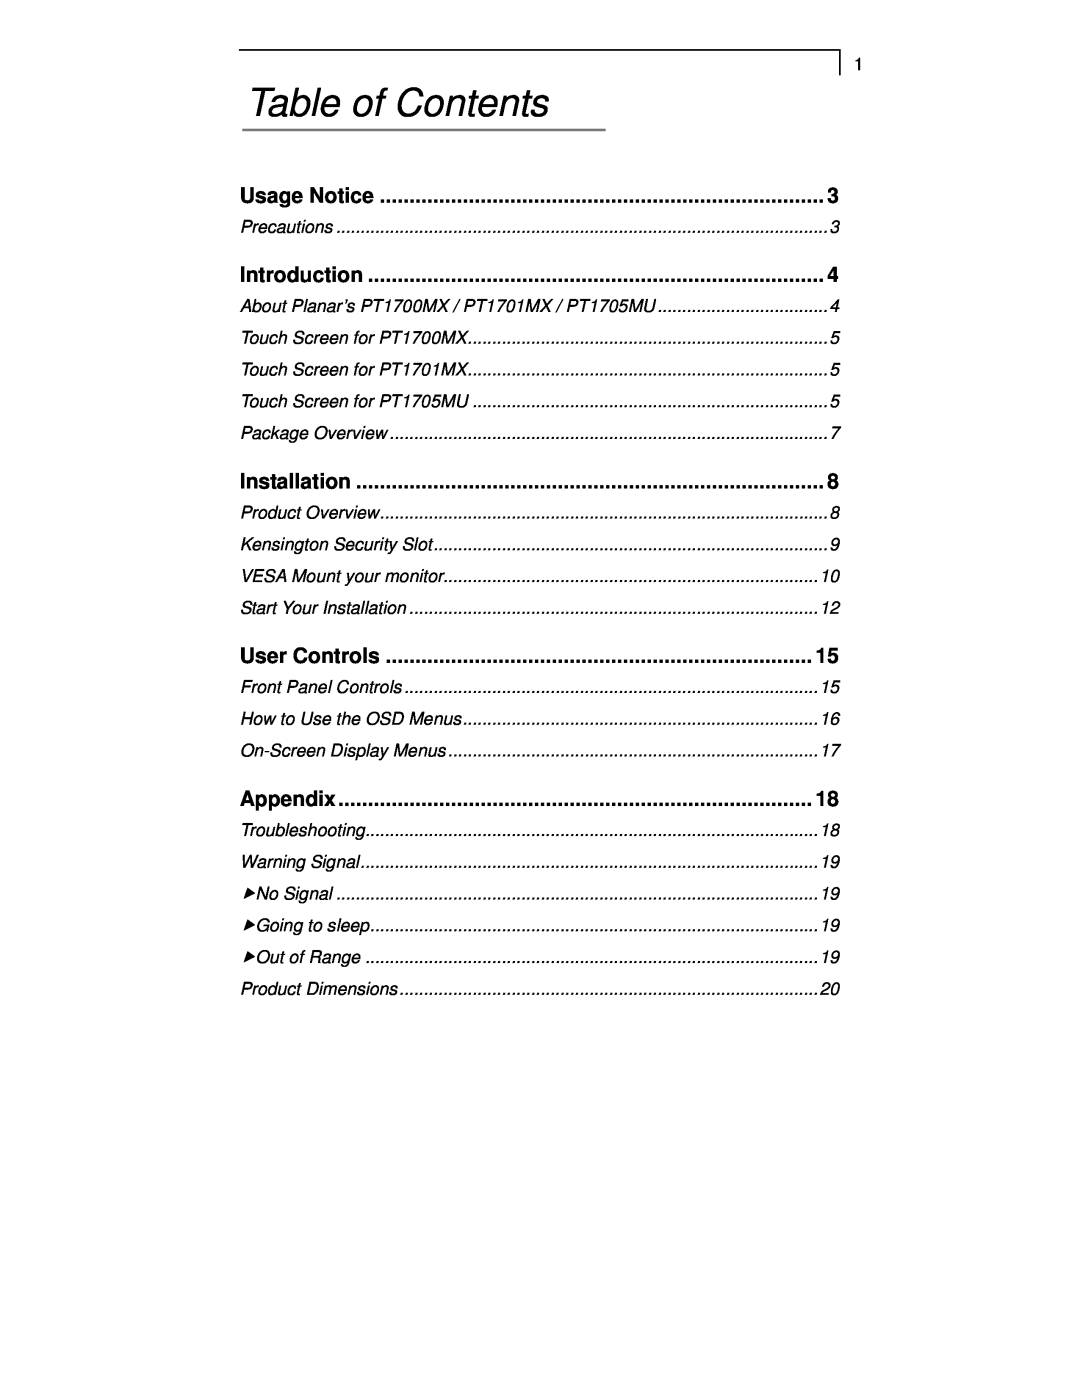 Planar PT1701MX manual Table of Contents, Usage Notice, Introduction, Installation, User Controls, Appendix 